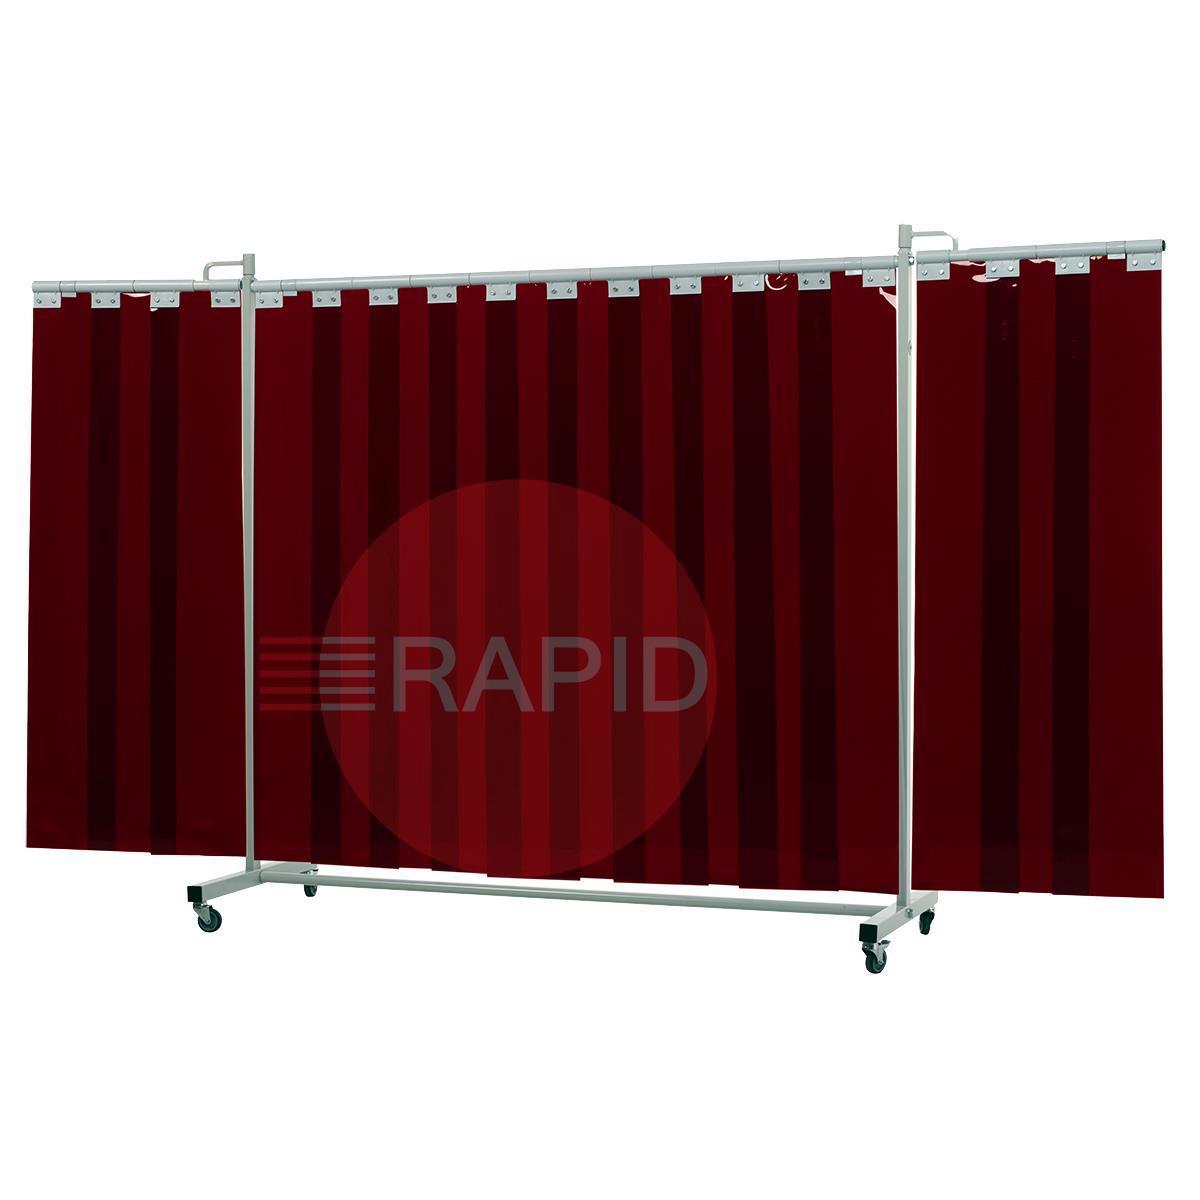 36.31.27  CEPRO Robusto Triptych Welding Screen with Bronze-CE Strips - 3.6m Wide x 2.2m High, Approved EN 25980